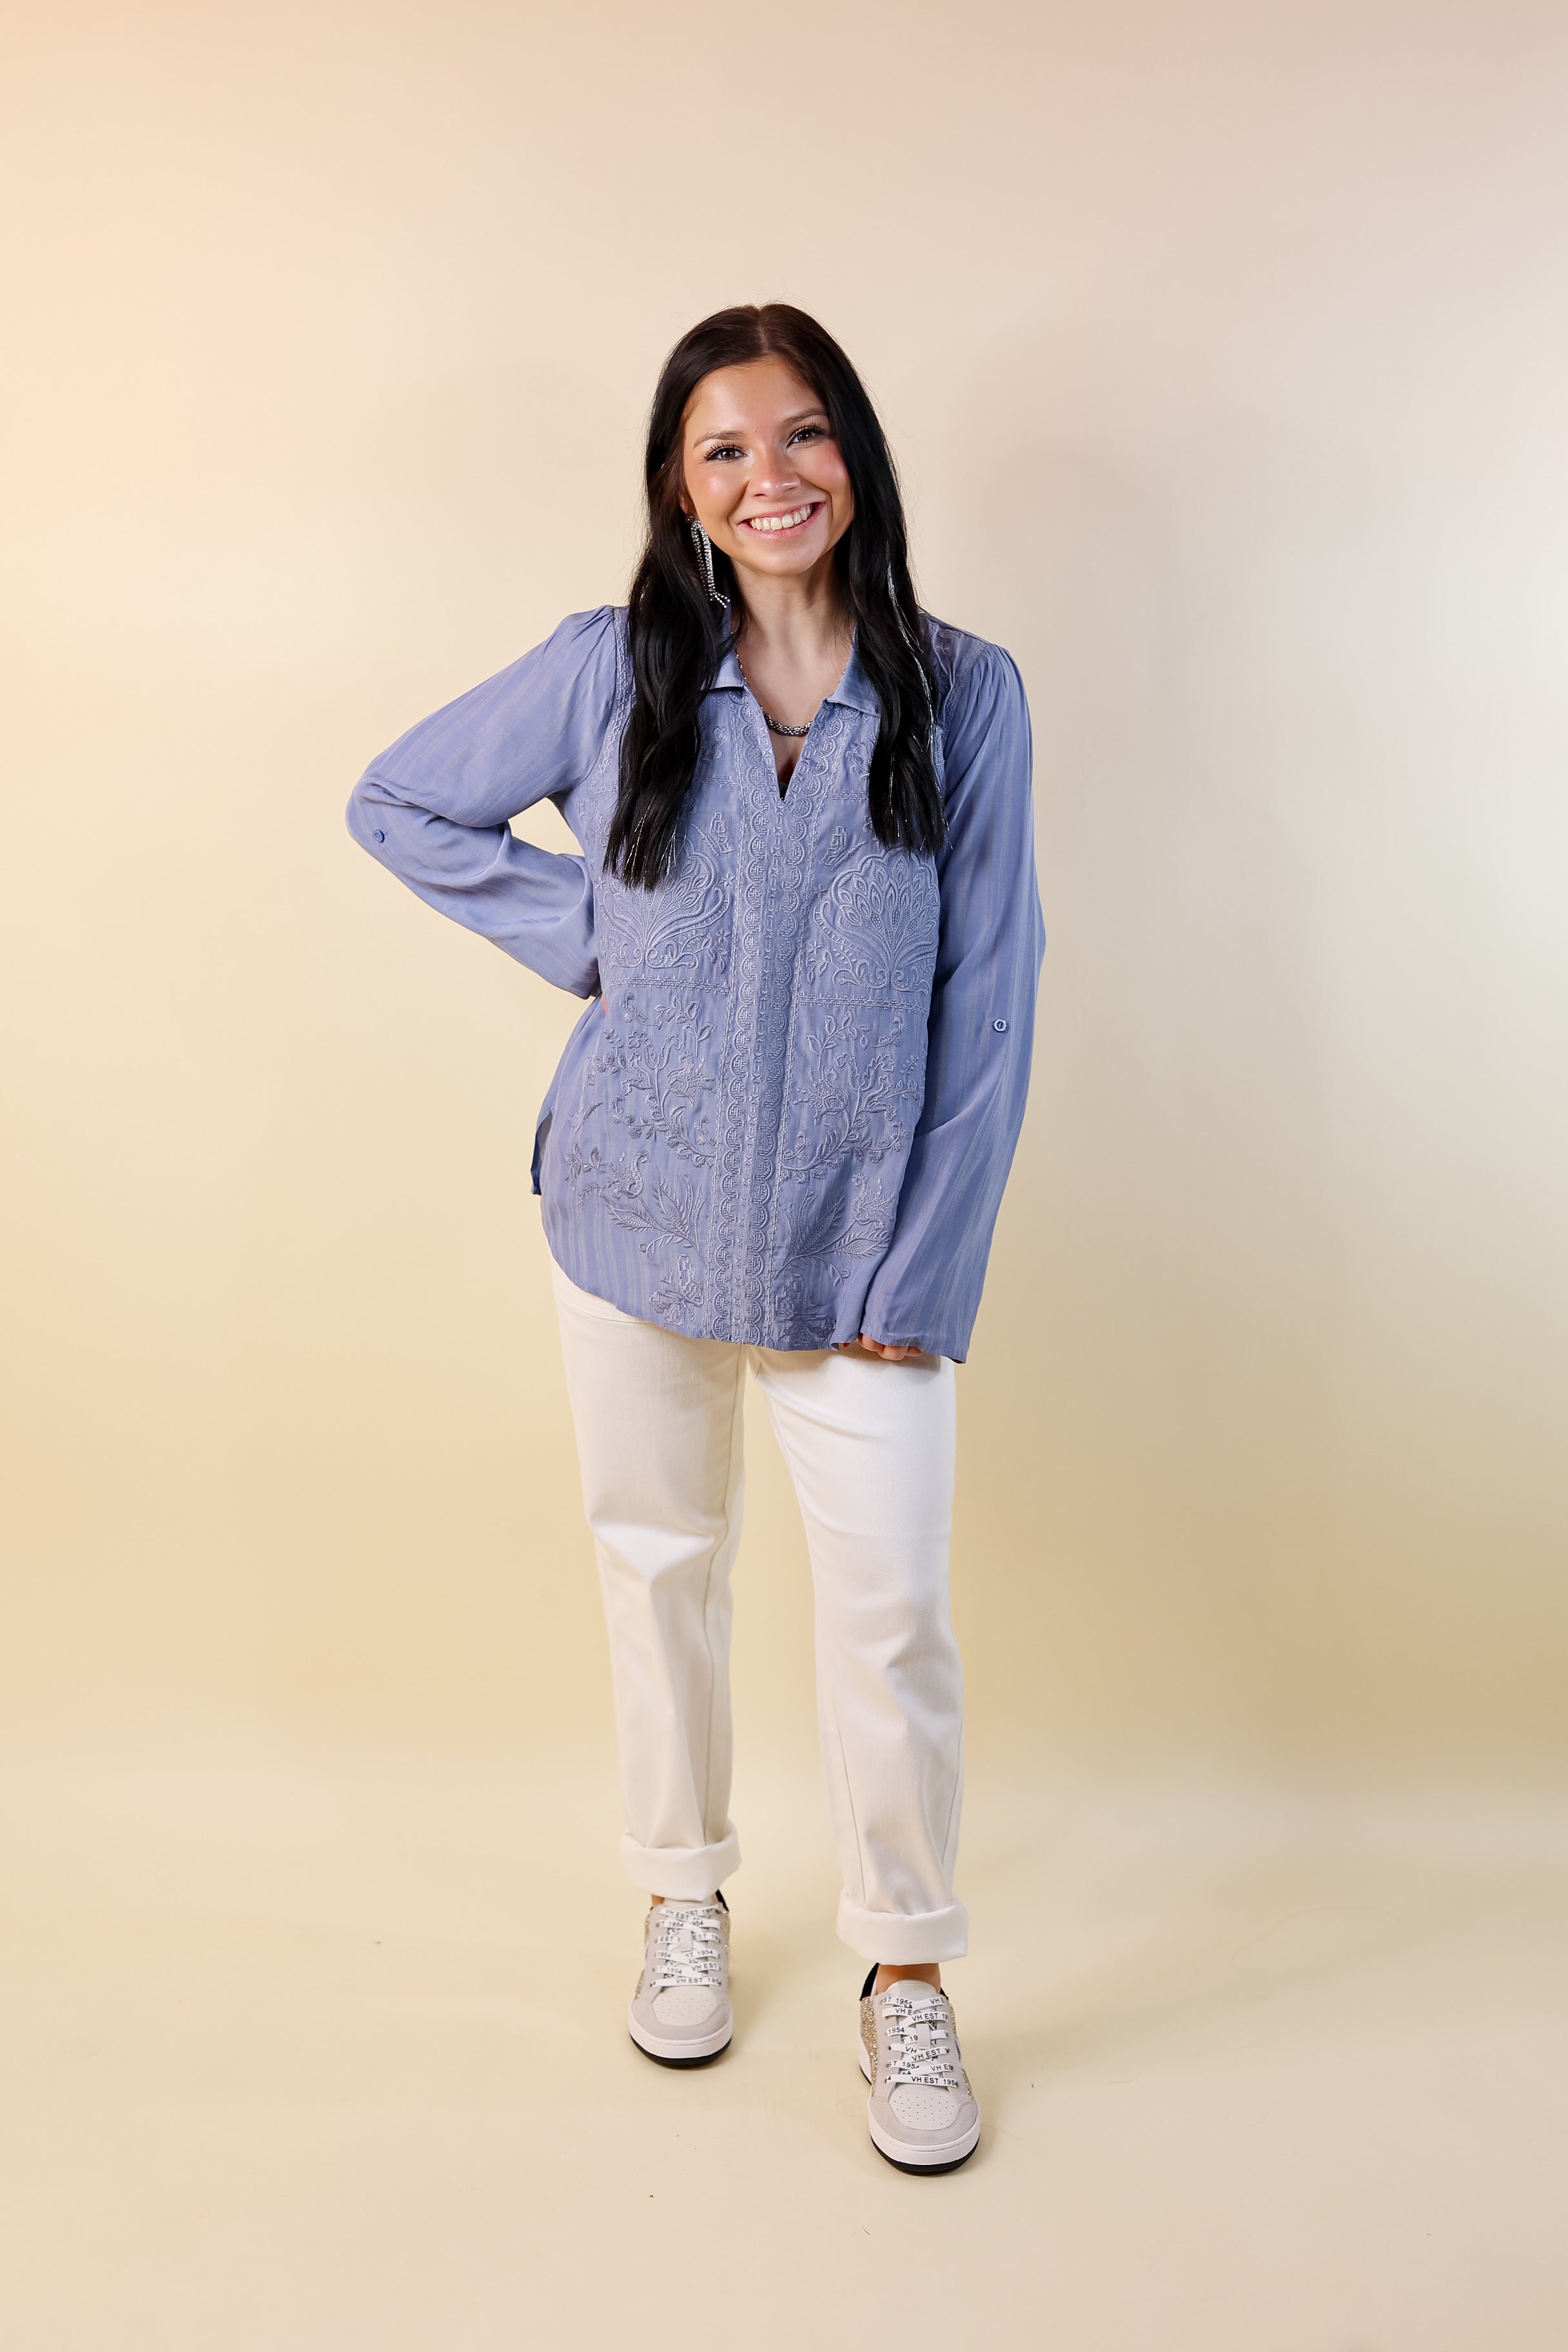 Sunny Garden Embroidered 3/4 Sleeve Top with Collared Neckline in Dusty Blue - Giddy Up Glamour Boutique